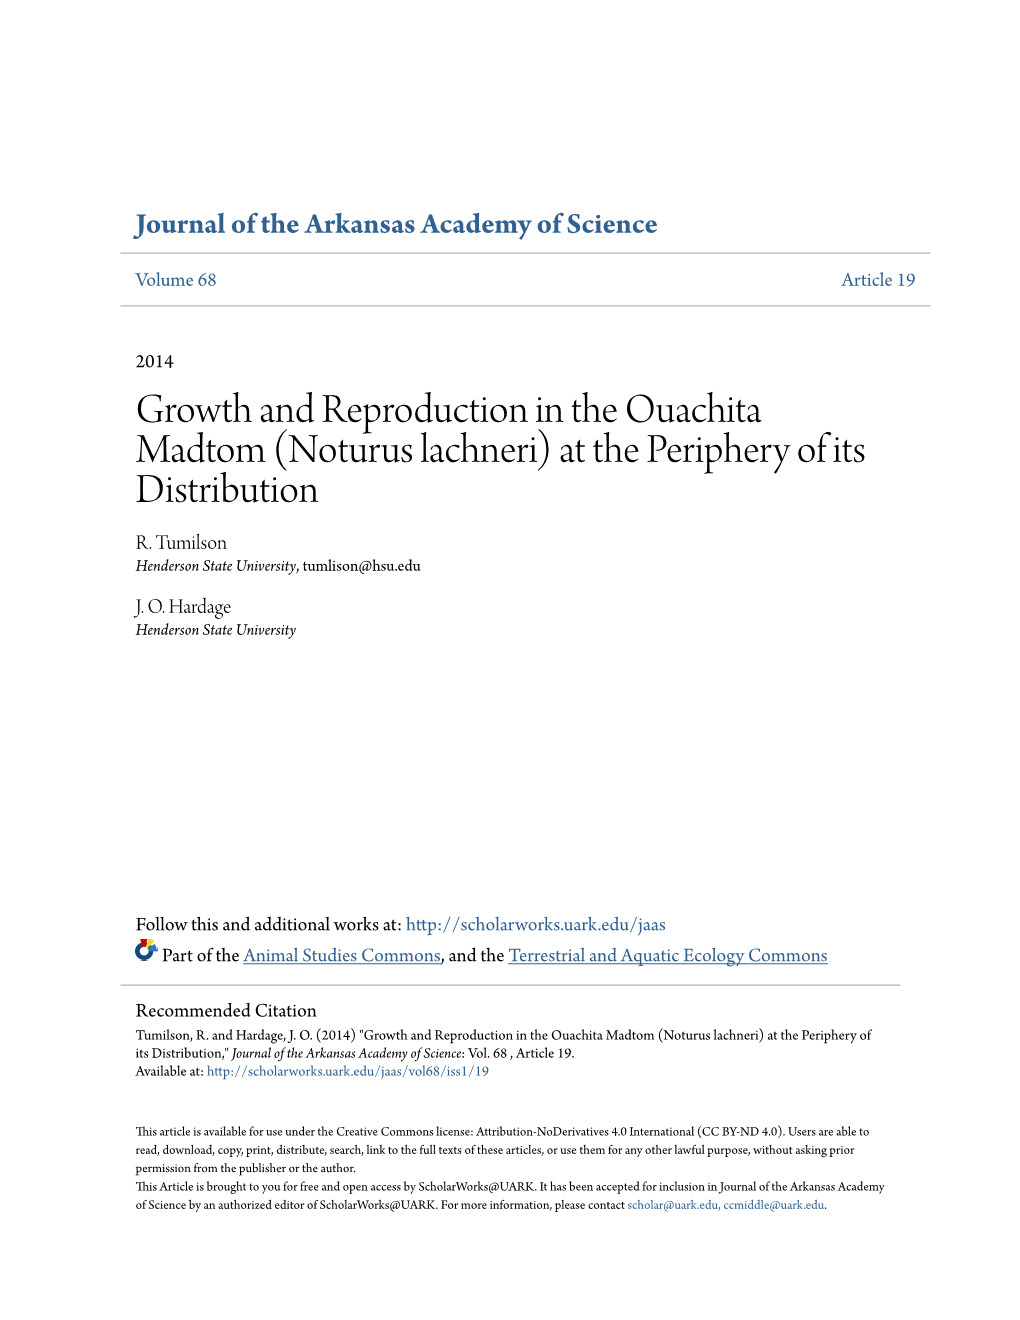 Growth and Reproduction in the Ouachita Madtom (Noturus Lachneri) at the Periphery of Its Distribution R